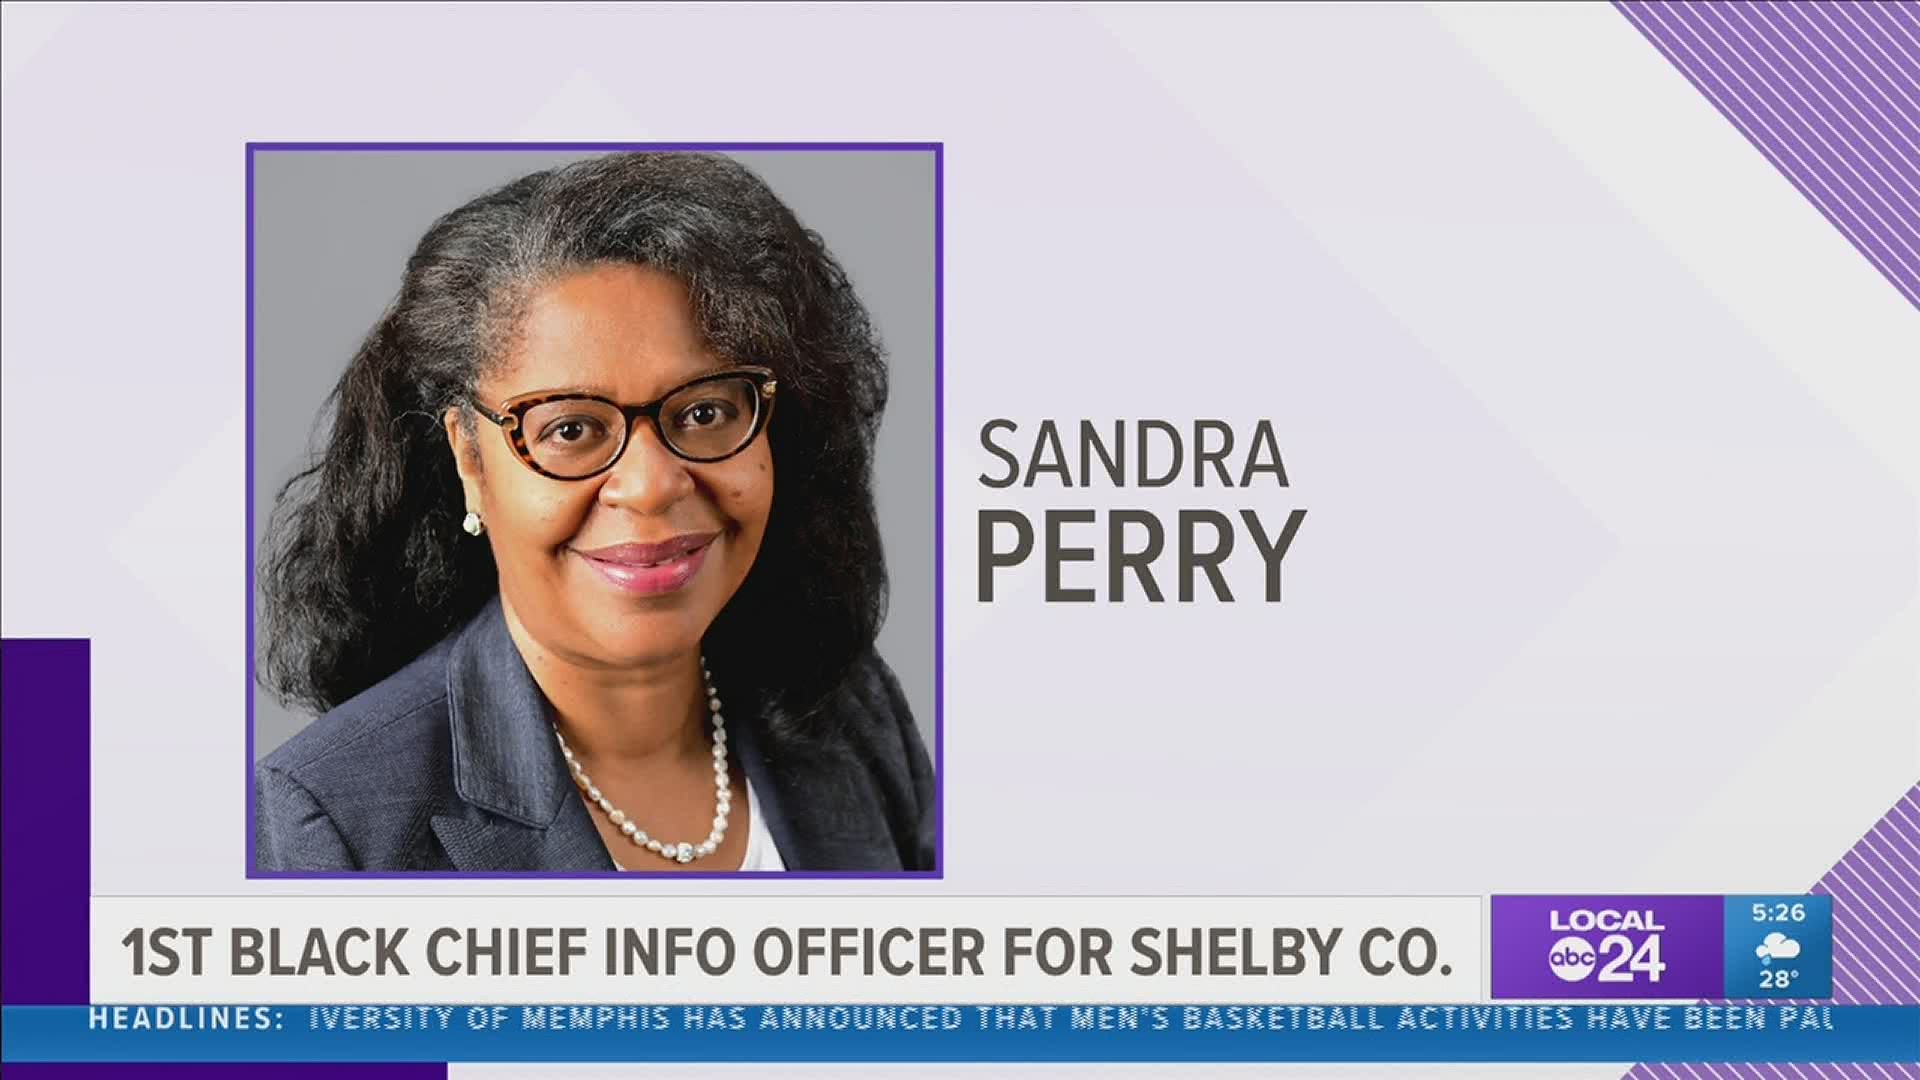 Sandra Perry makes history as the first Black woman to hold the position.